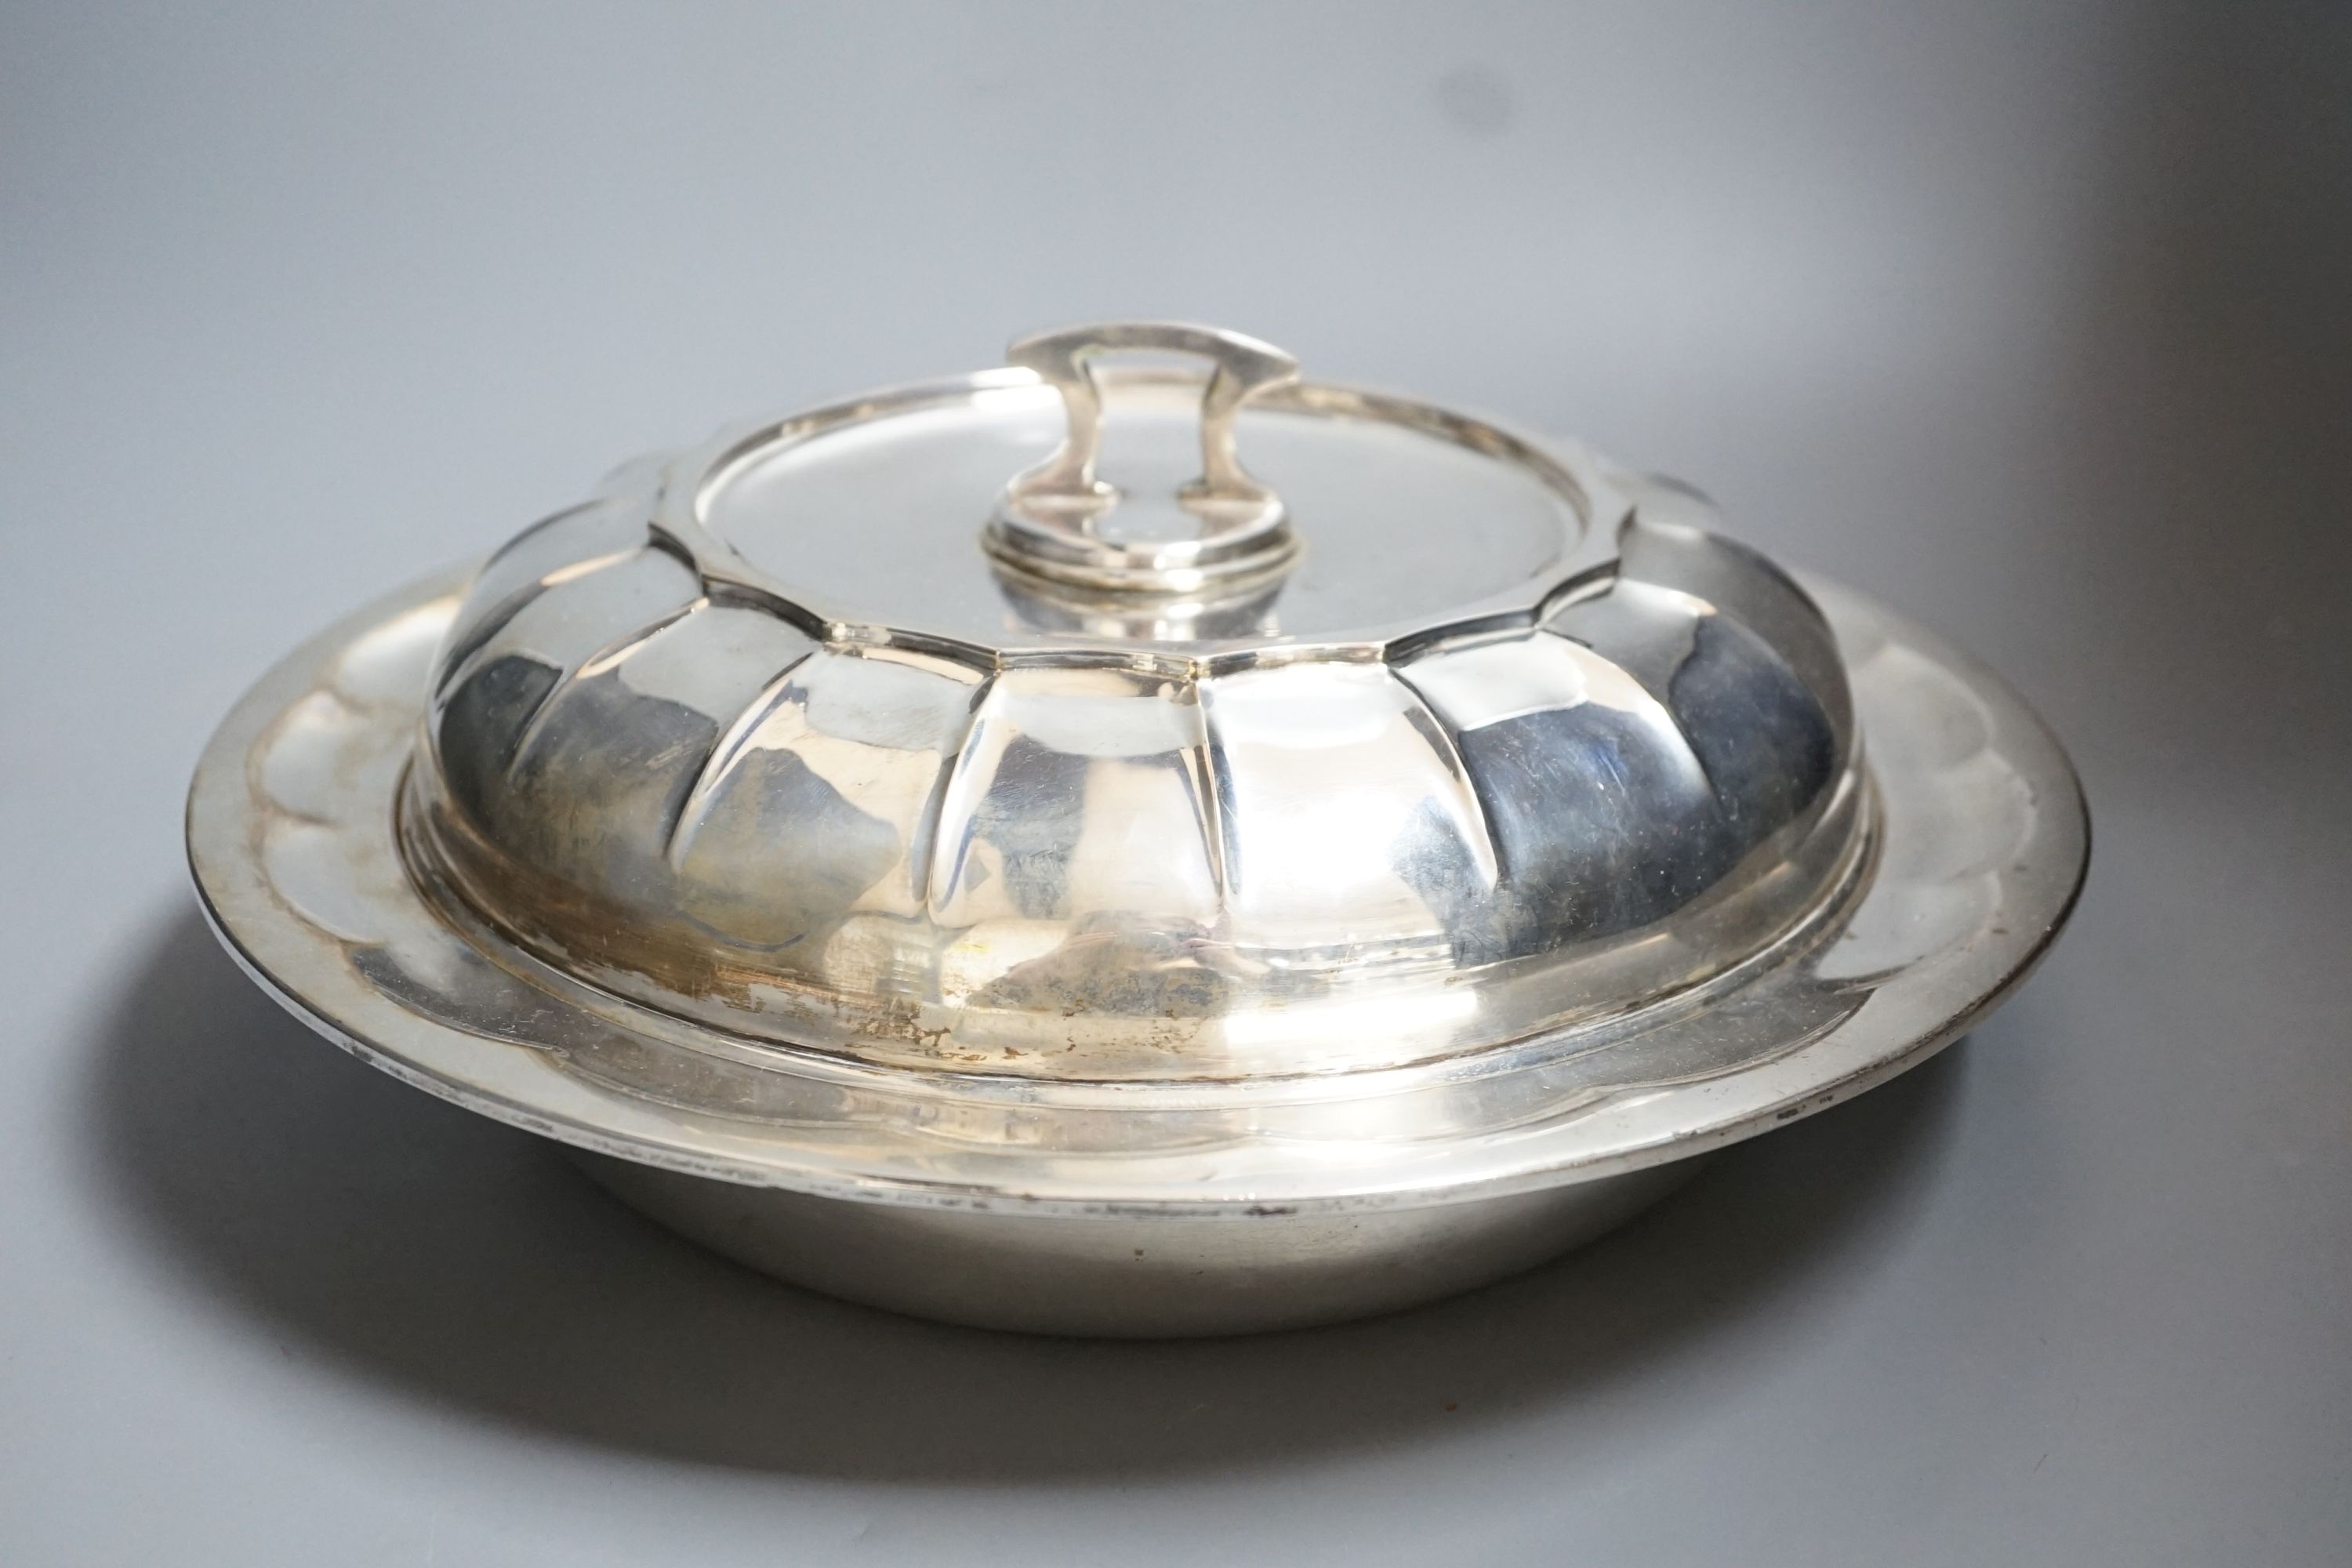 An Austro-Hungarian white metal chaffing dish and cover, by Seligmann, 30.4cm, 47.5oz.